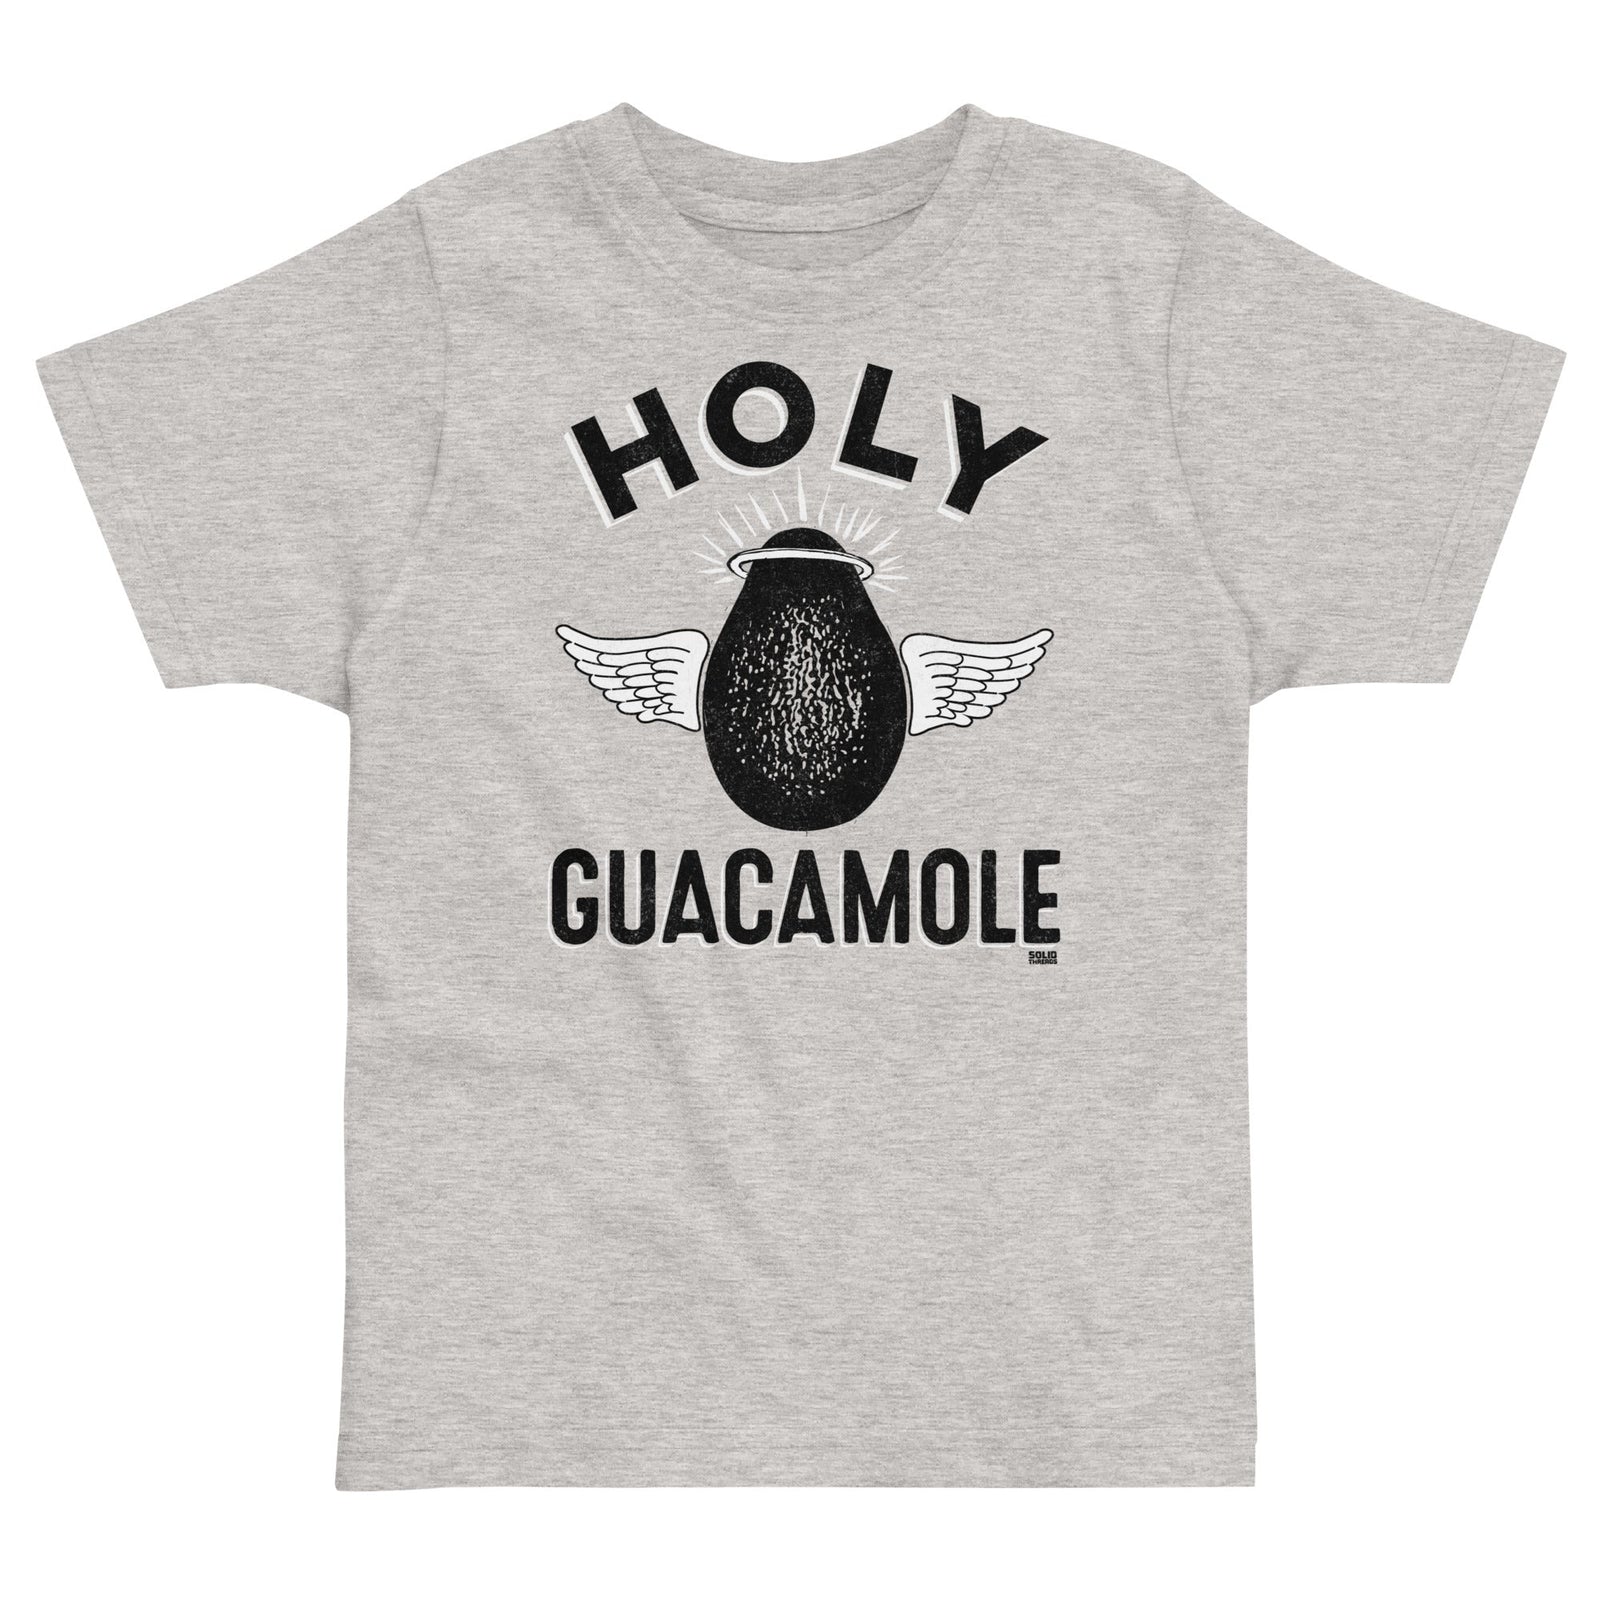 Toddler's Holy Guacamole Retro Food Extra Soft T-Shirt | Funny Avocado Tee On Model | Solid Threads